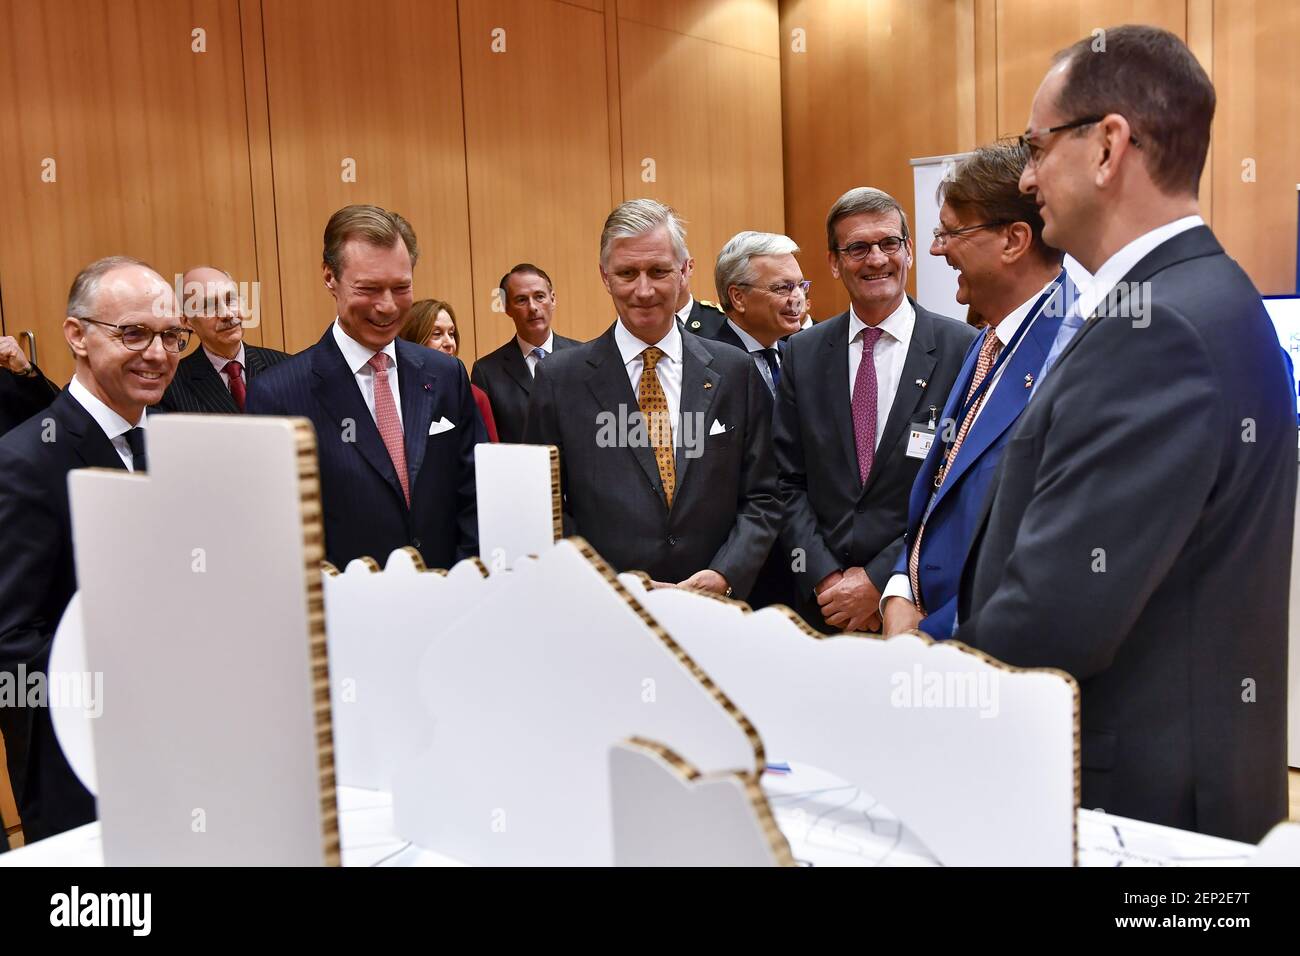 Grand Duke Henri of Luxembourg, King Philippe - Filip of Belgium, FEB-VBO President Bernard Gilliot and Besix CEO Rik Vandenberghe pictured during a seminar on the third and last day of a State Visit of the Belgian royal couple to the Grand Duchy of Luxembourg, Thursday 17 October 2019. (PHOTO by DIRK WAEM/BELGA/Sipa USA) Stock Photo